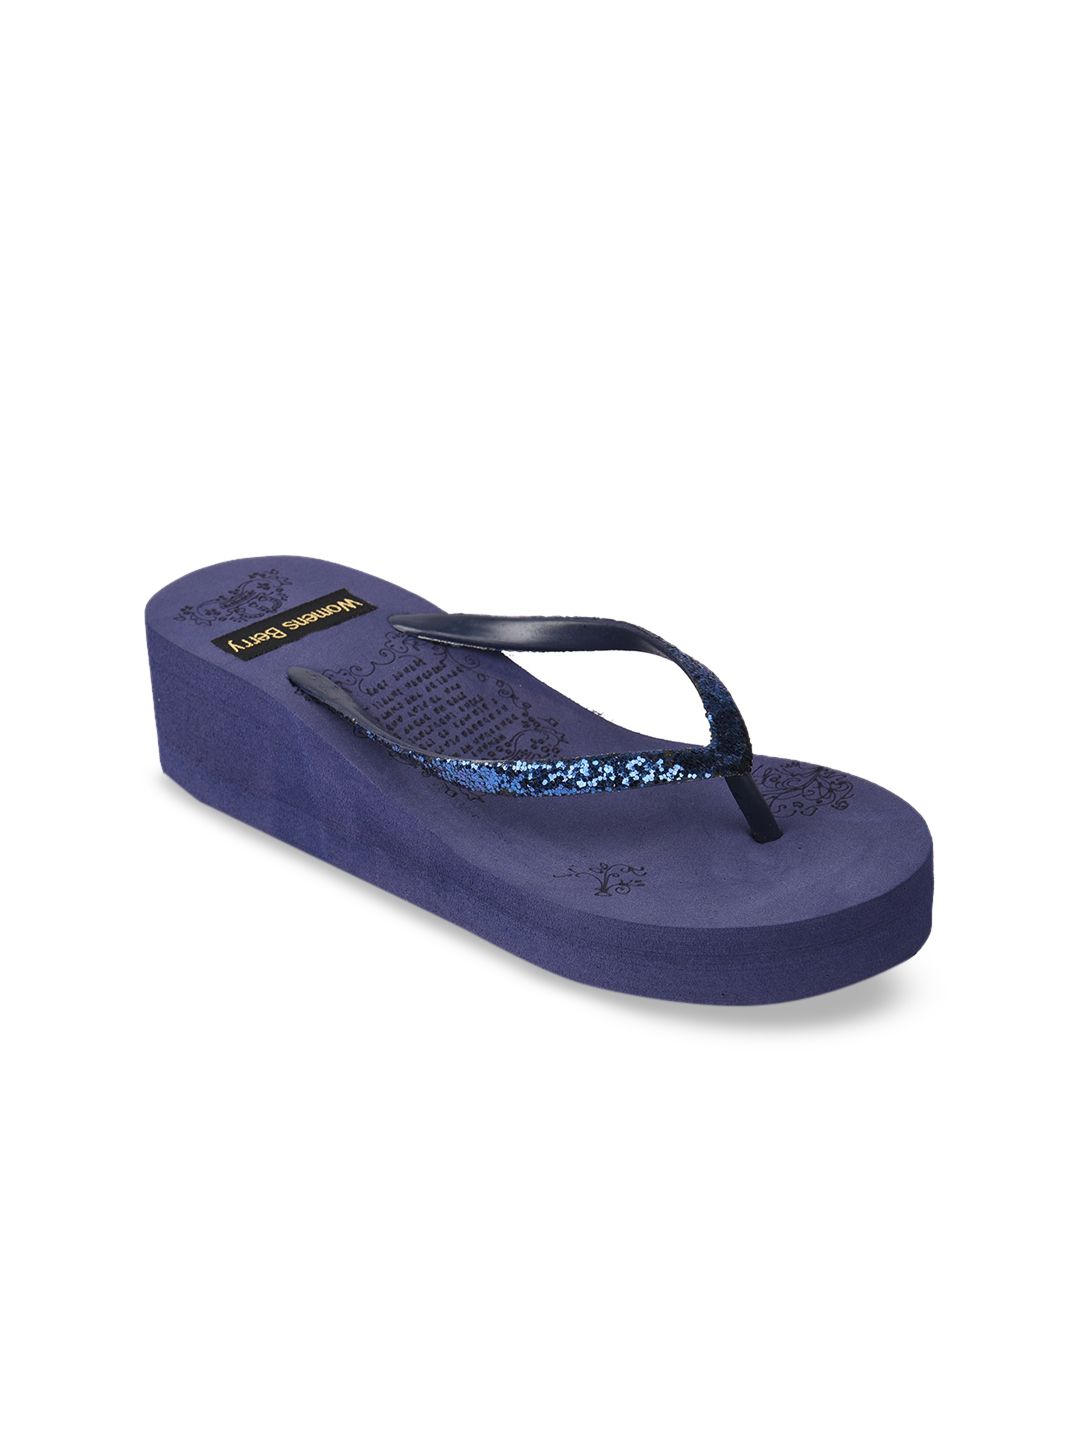 WOMENS BERRY Women Navy Blue Embellished Wedges Price in India